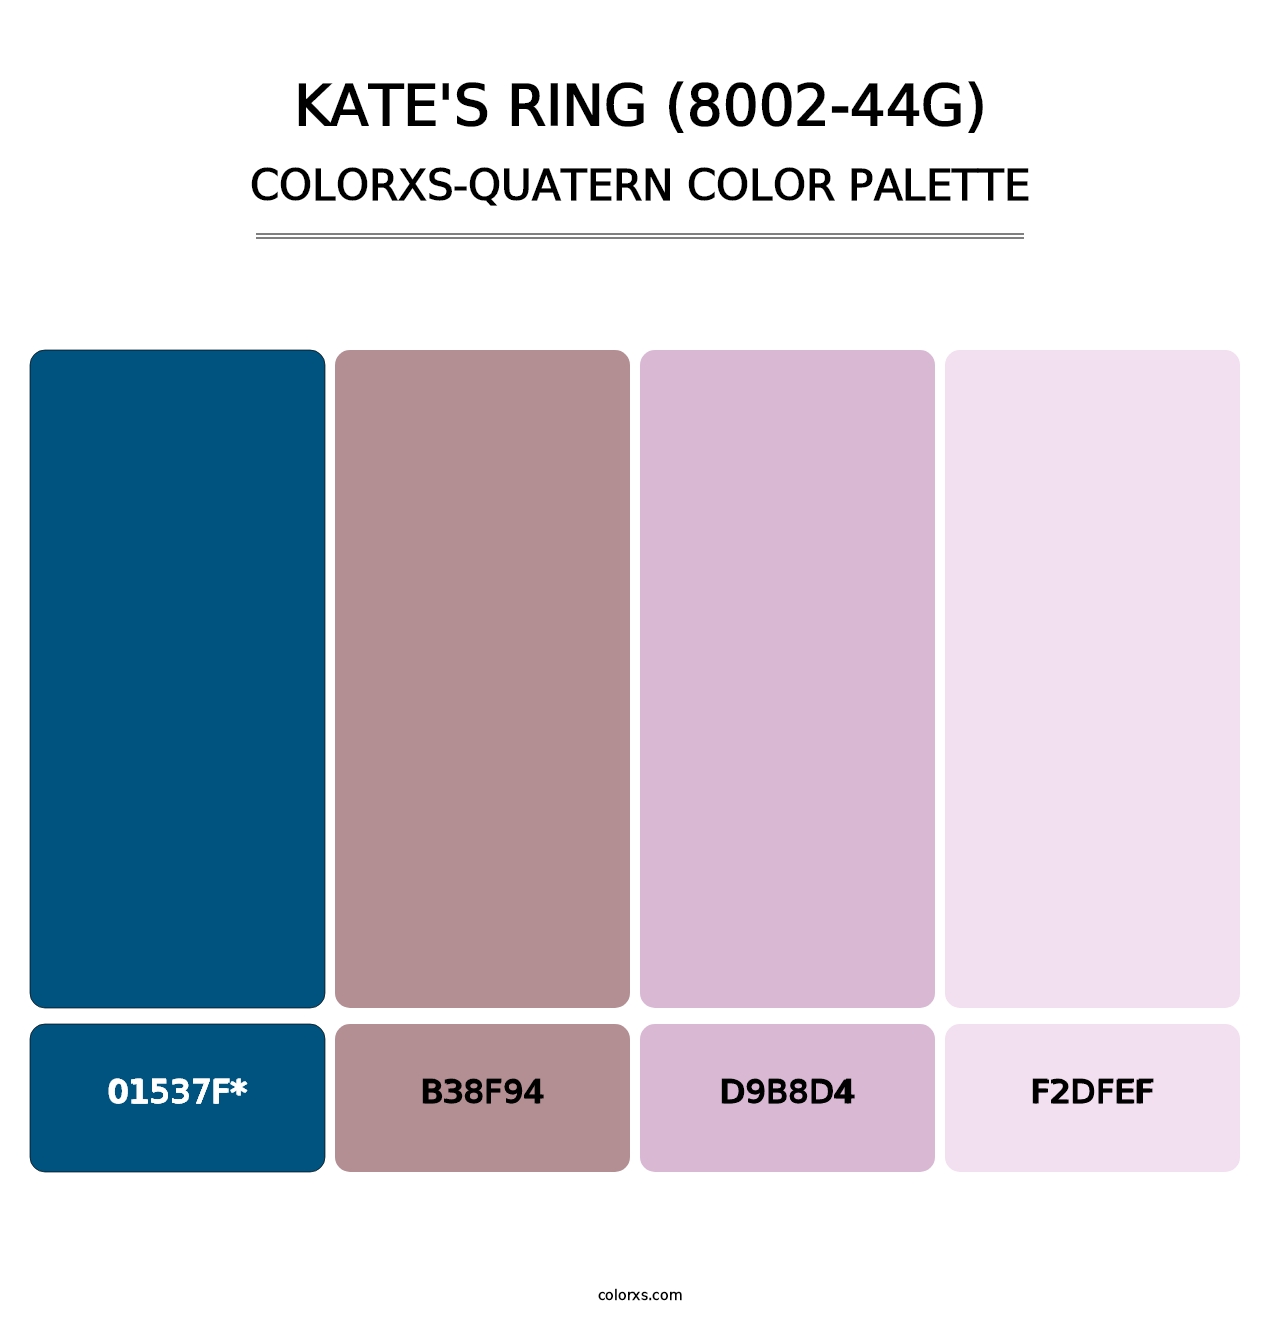 Kate's Ring (8002-44G) - Colorxs Quatern Palette